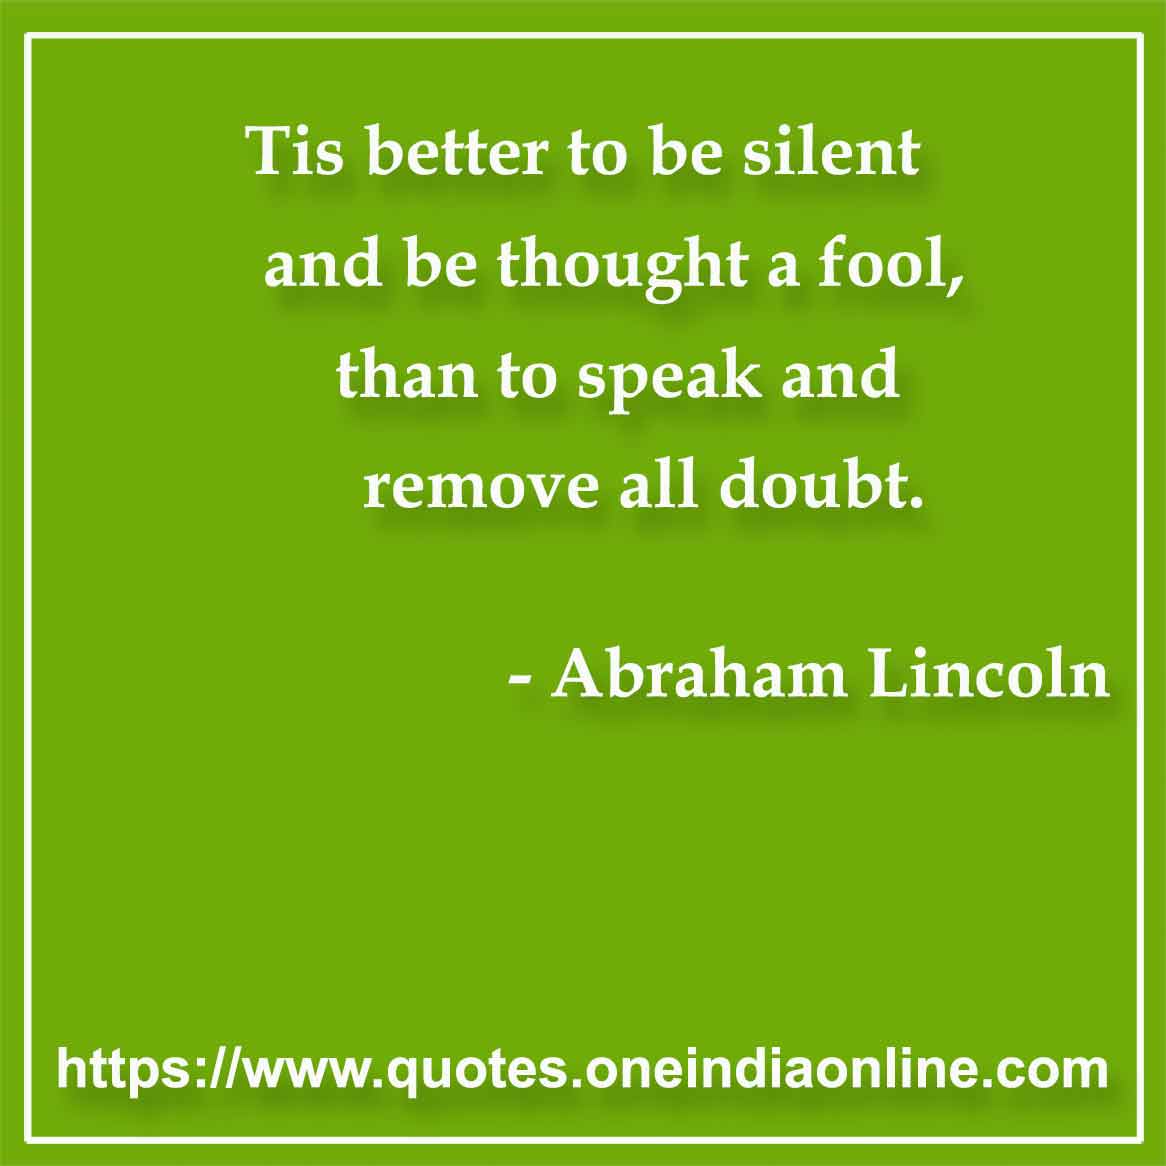 Tis better to be silent and be thought a fool, than to speak and remove all doubt.

- Silence Quotes by Abraham Lincoln